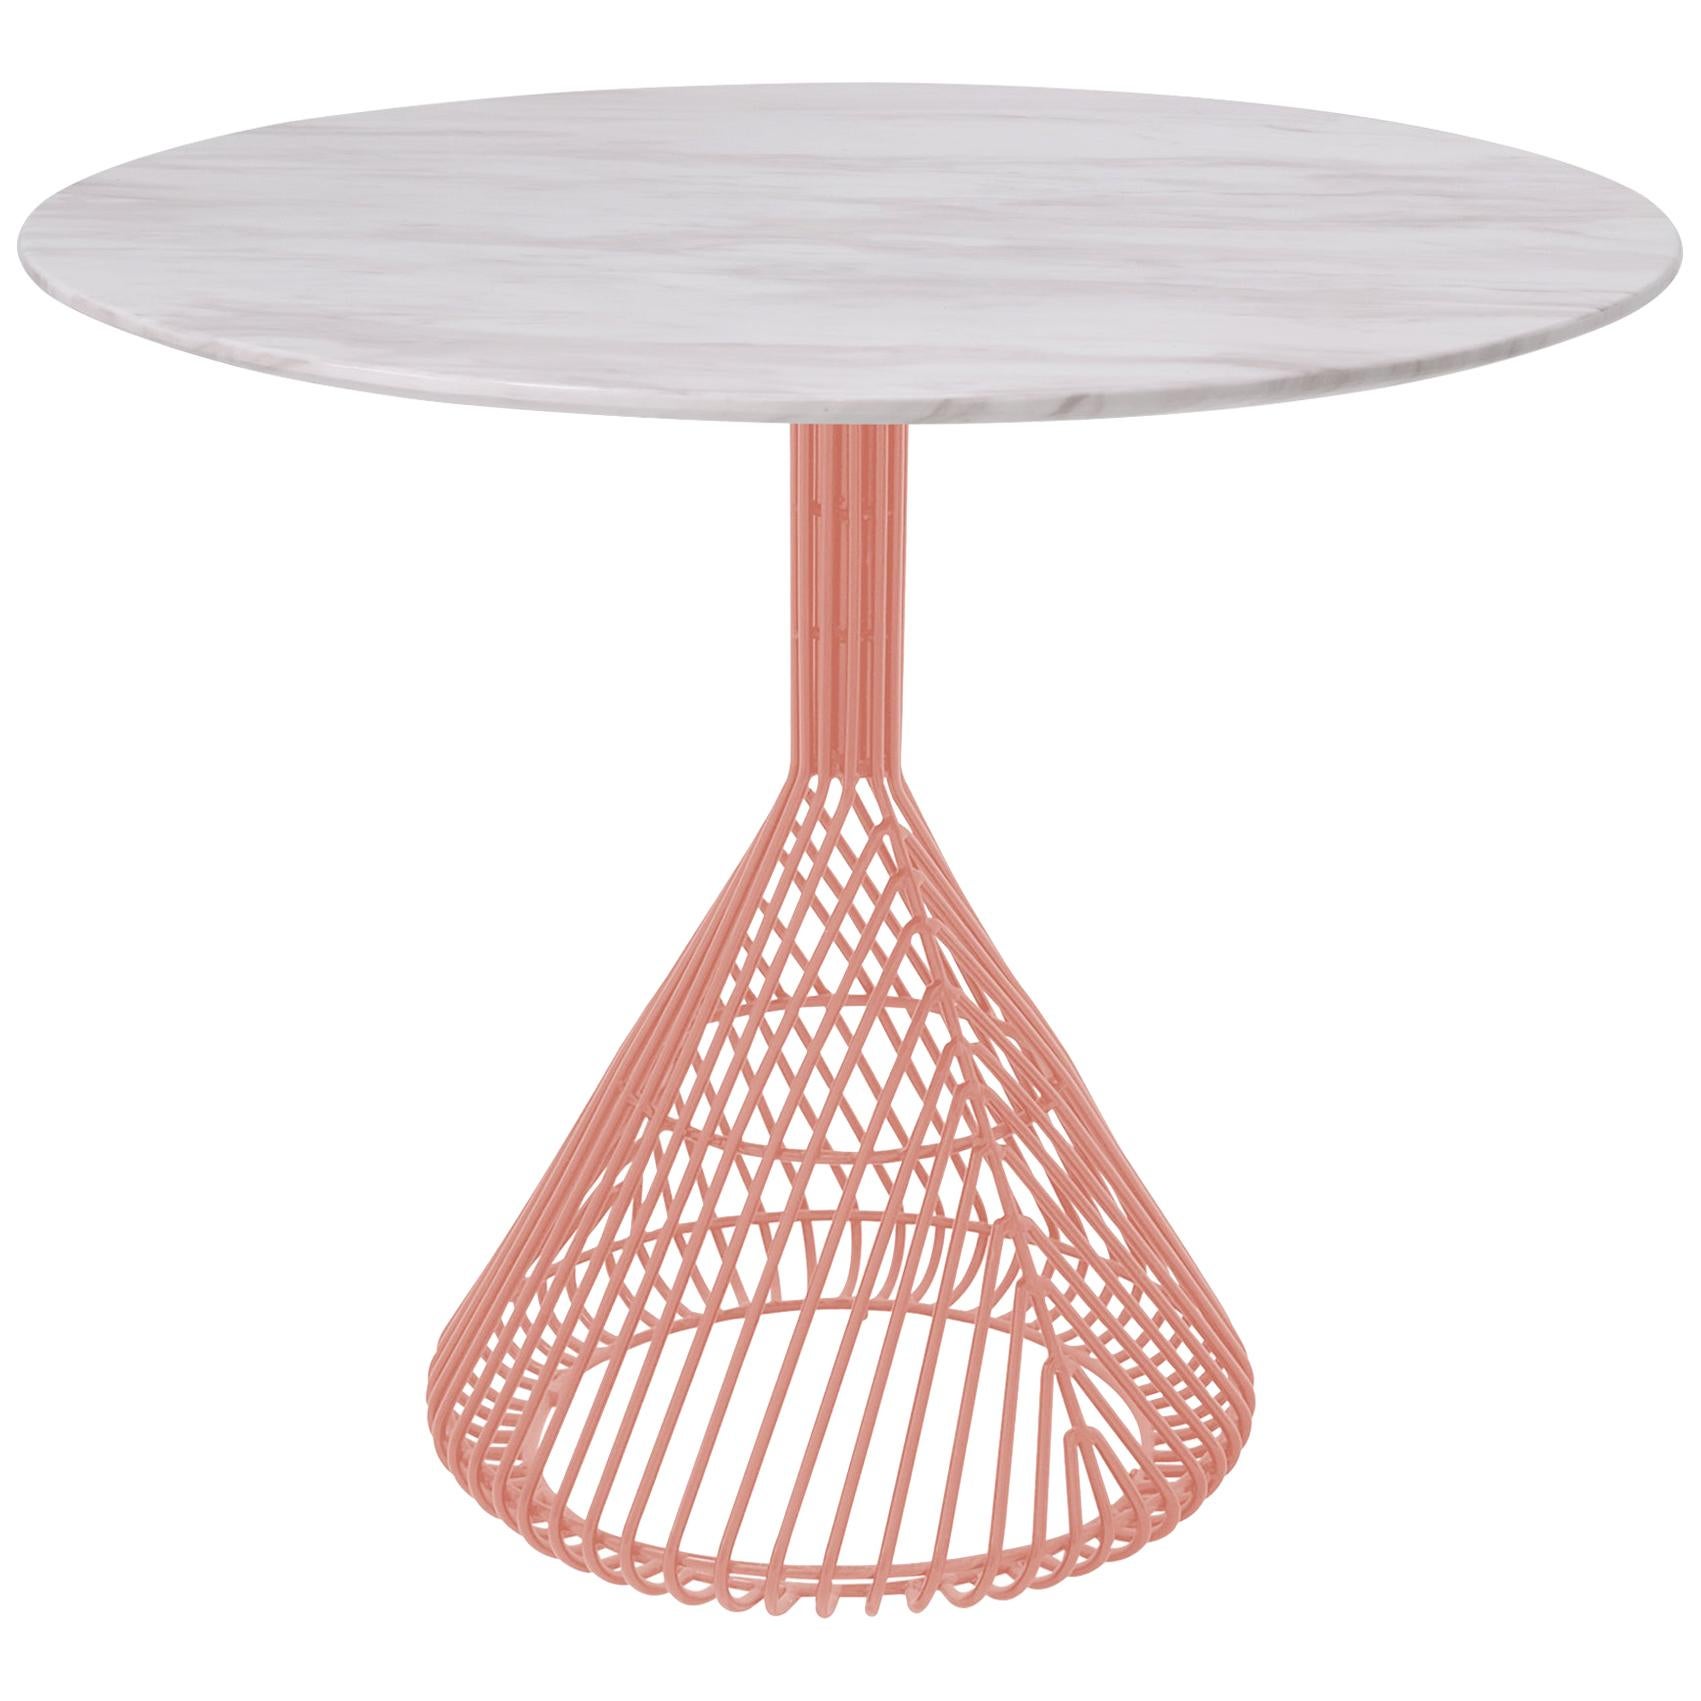 Modern Bistro Table, Wire Dining Table in Peachy Pink with White Marble Top